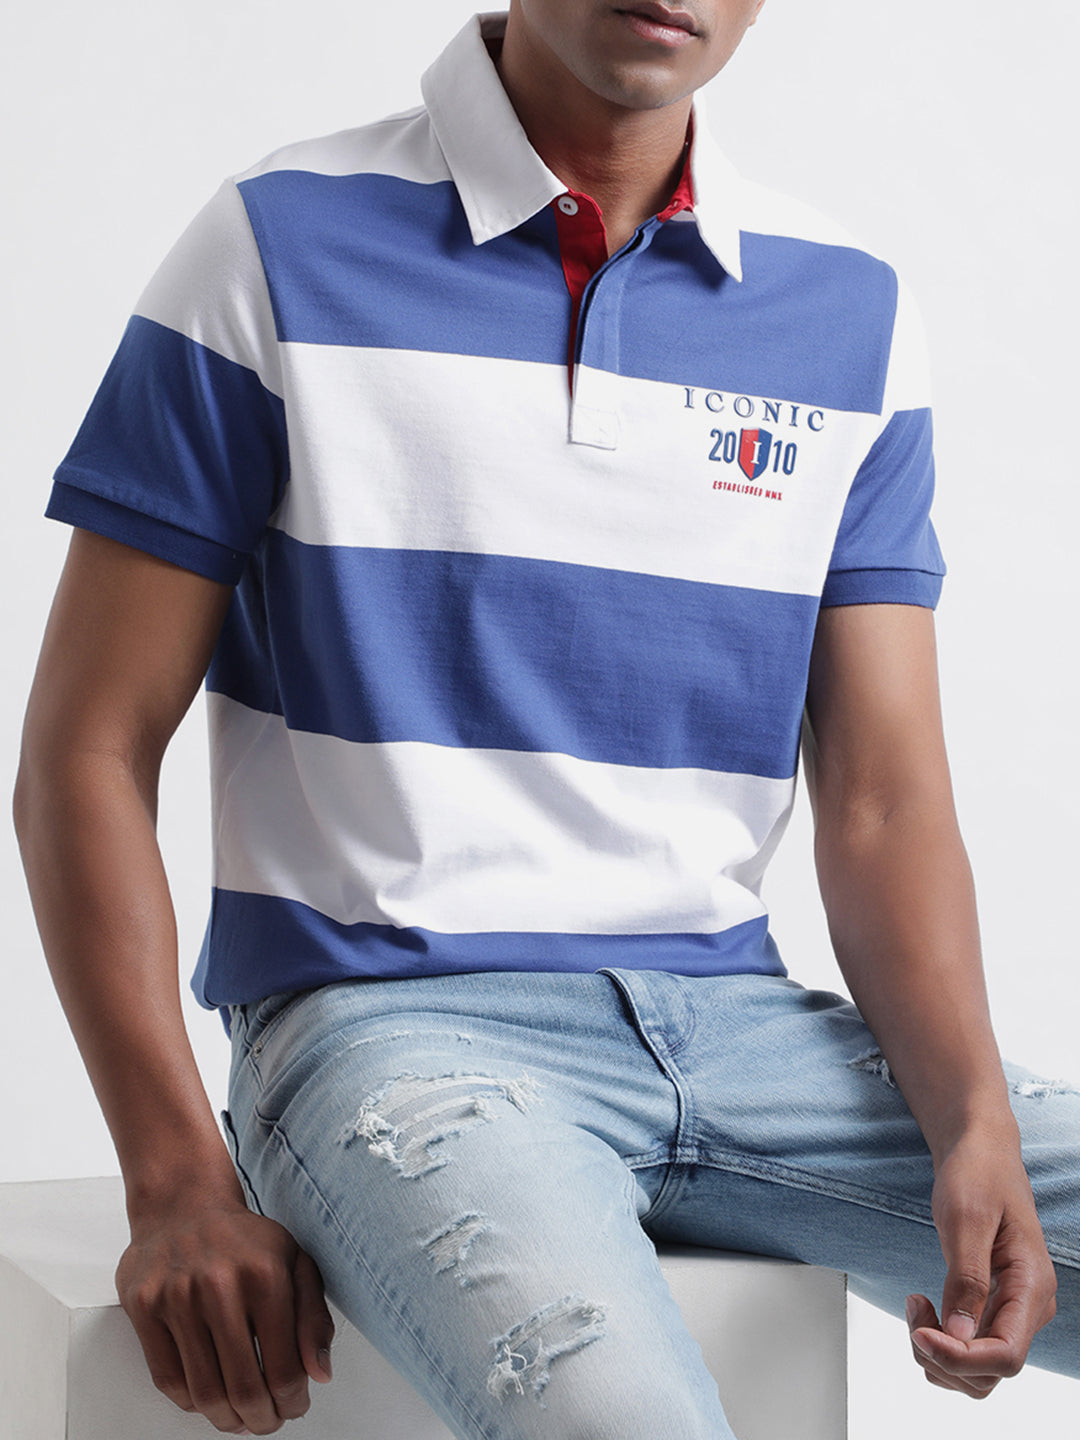 Iconic Multi Striped Regular Fit Polo T-Shirt